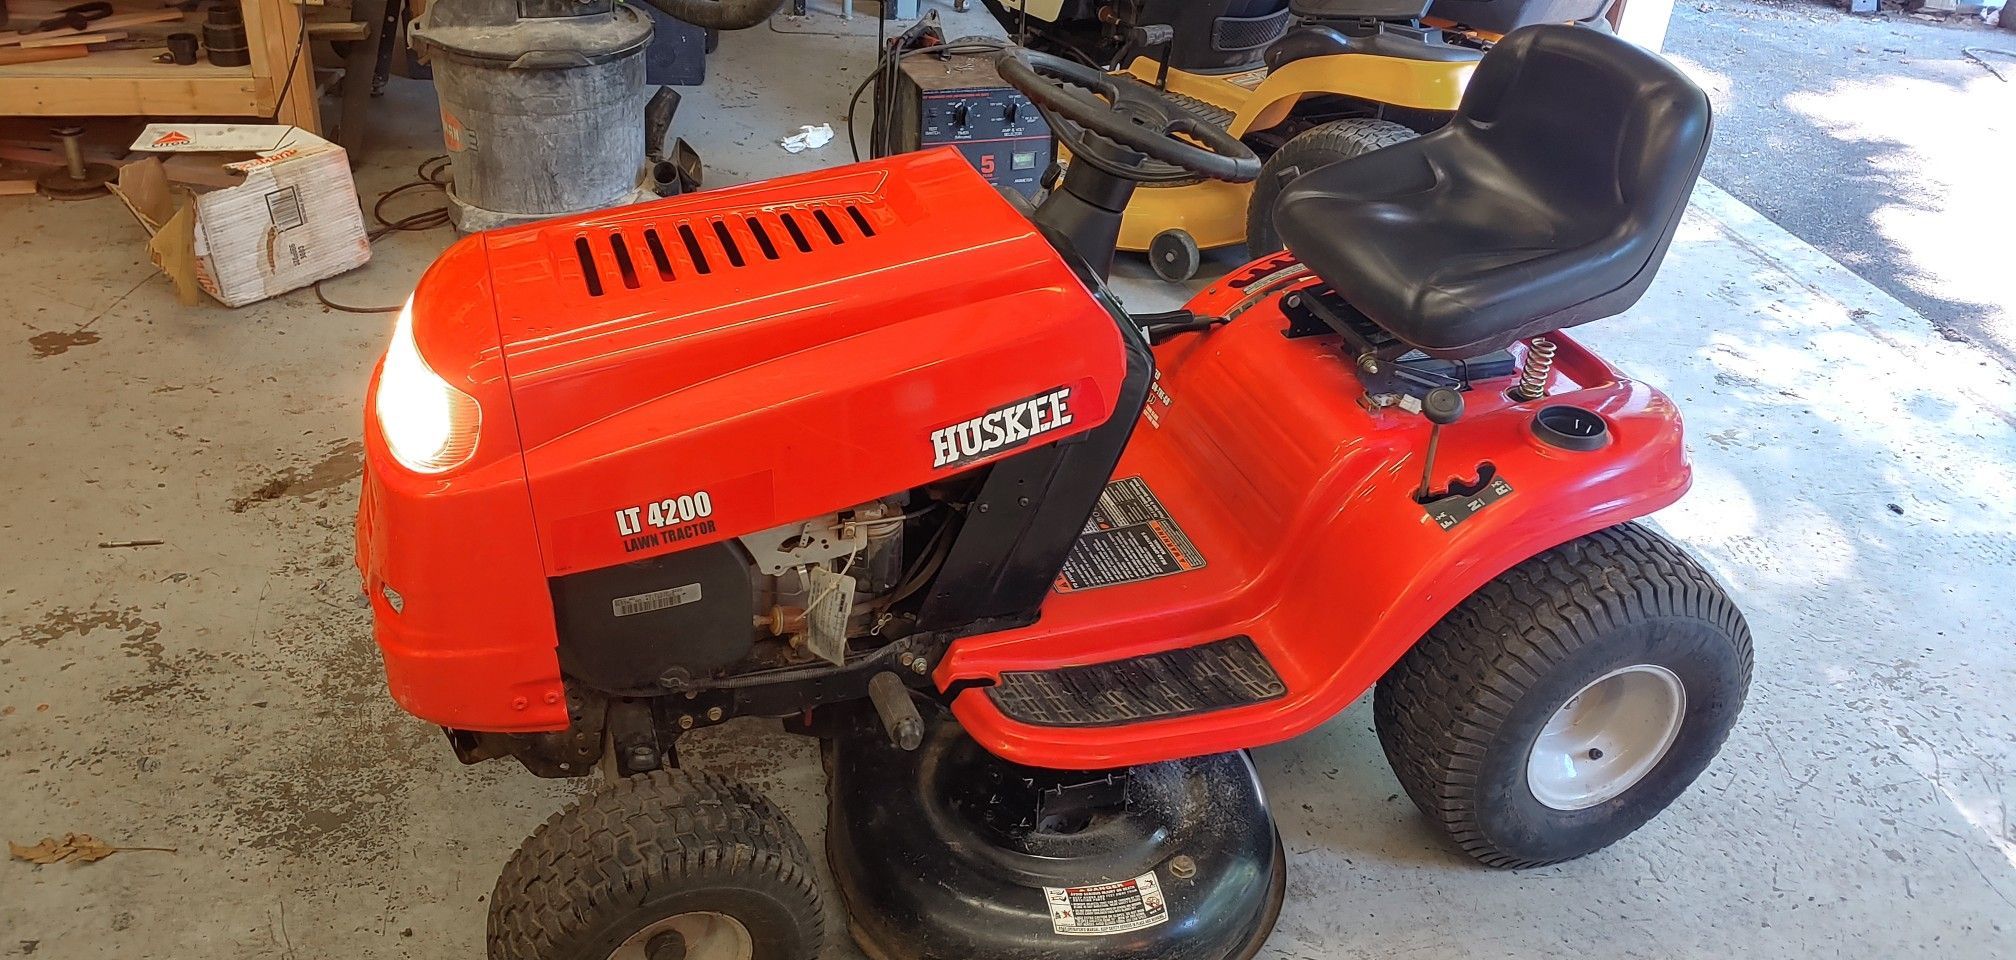 Huskee lt4200 lawn tractor. 17hp. 42 in deck